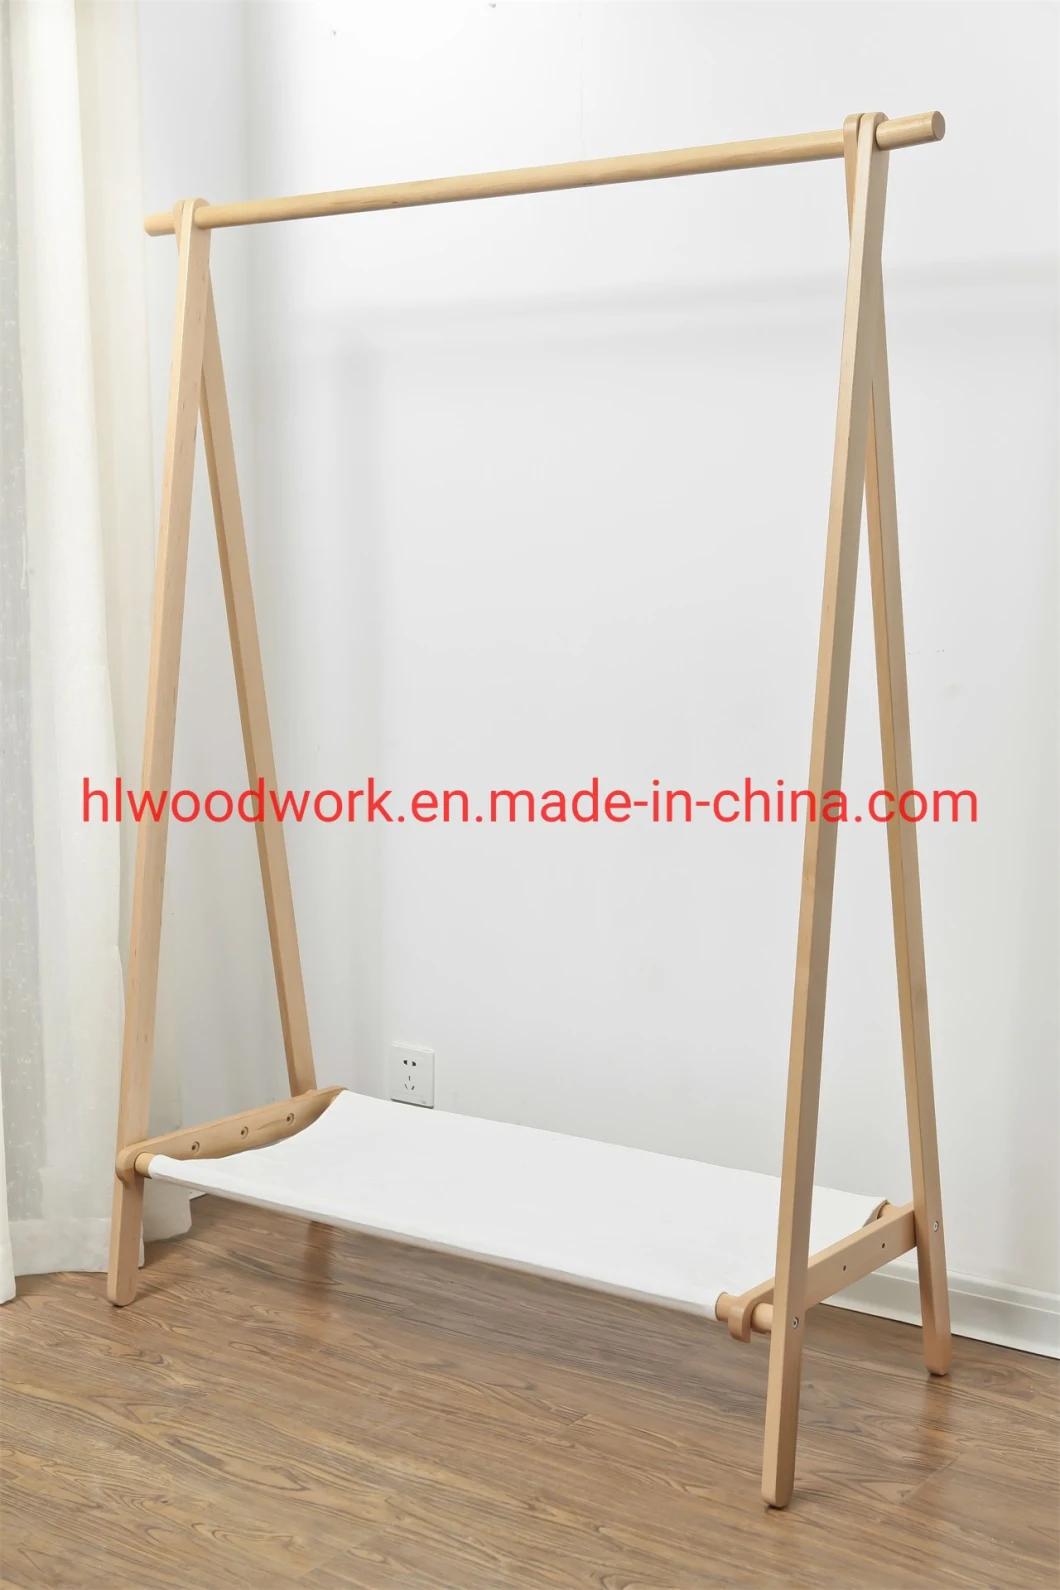 Beech Wood Stand Coat Rack Stand Hanger Foyer Furniture Natural Color Fabric Style Living Room Coat Rack Bedroom Coat Rack